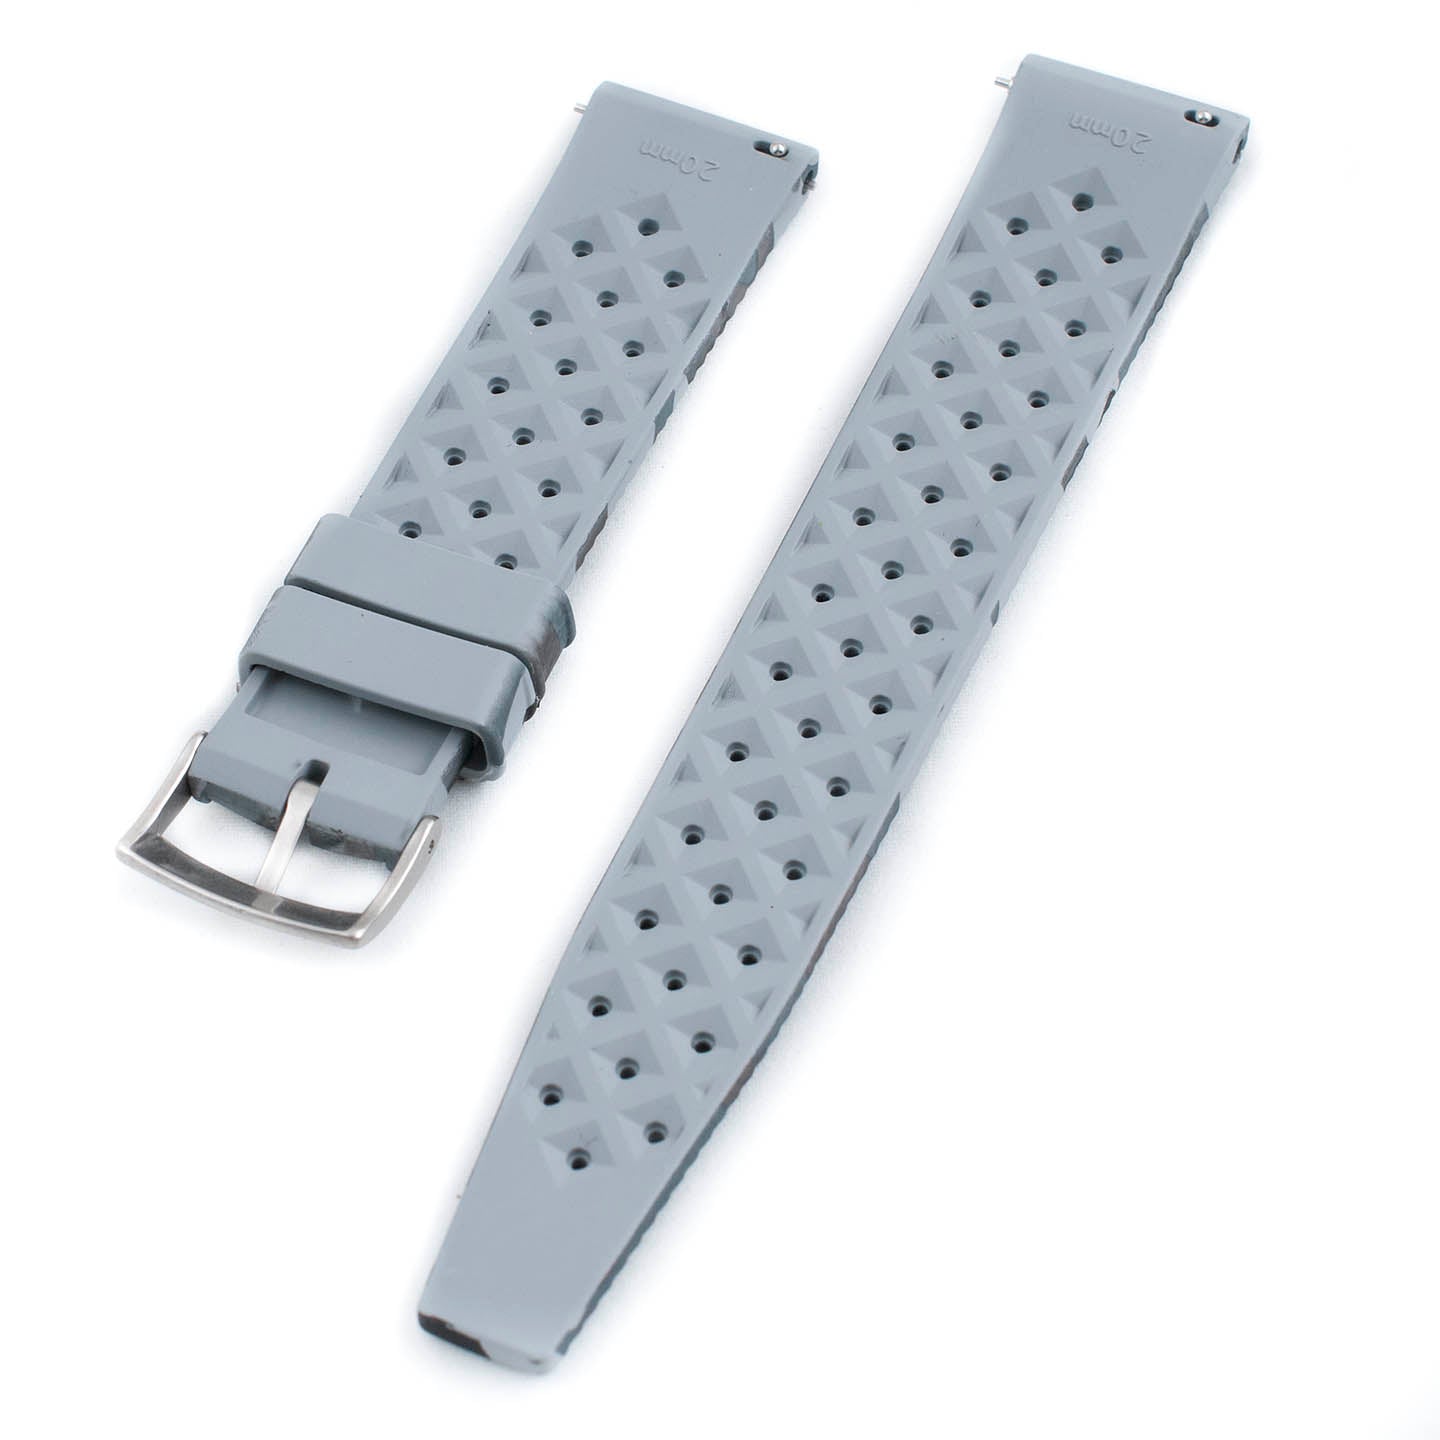 Tropical retro vintage replacement watch strap band FKM rubber tropic 19mm 20mm 21mm 22mm gray grey camo camouflage